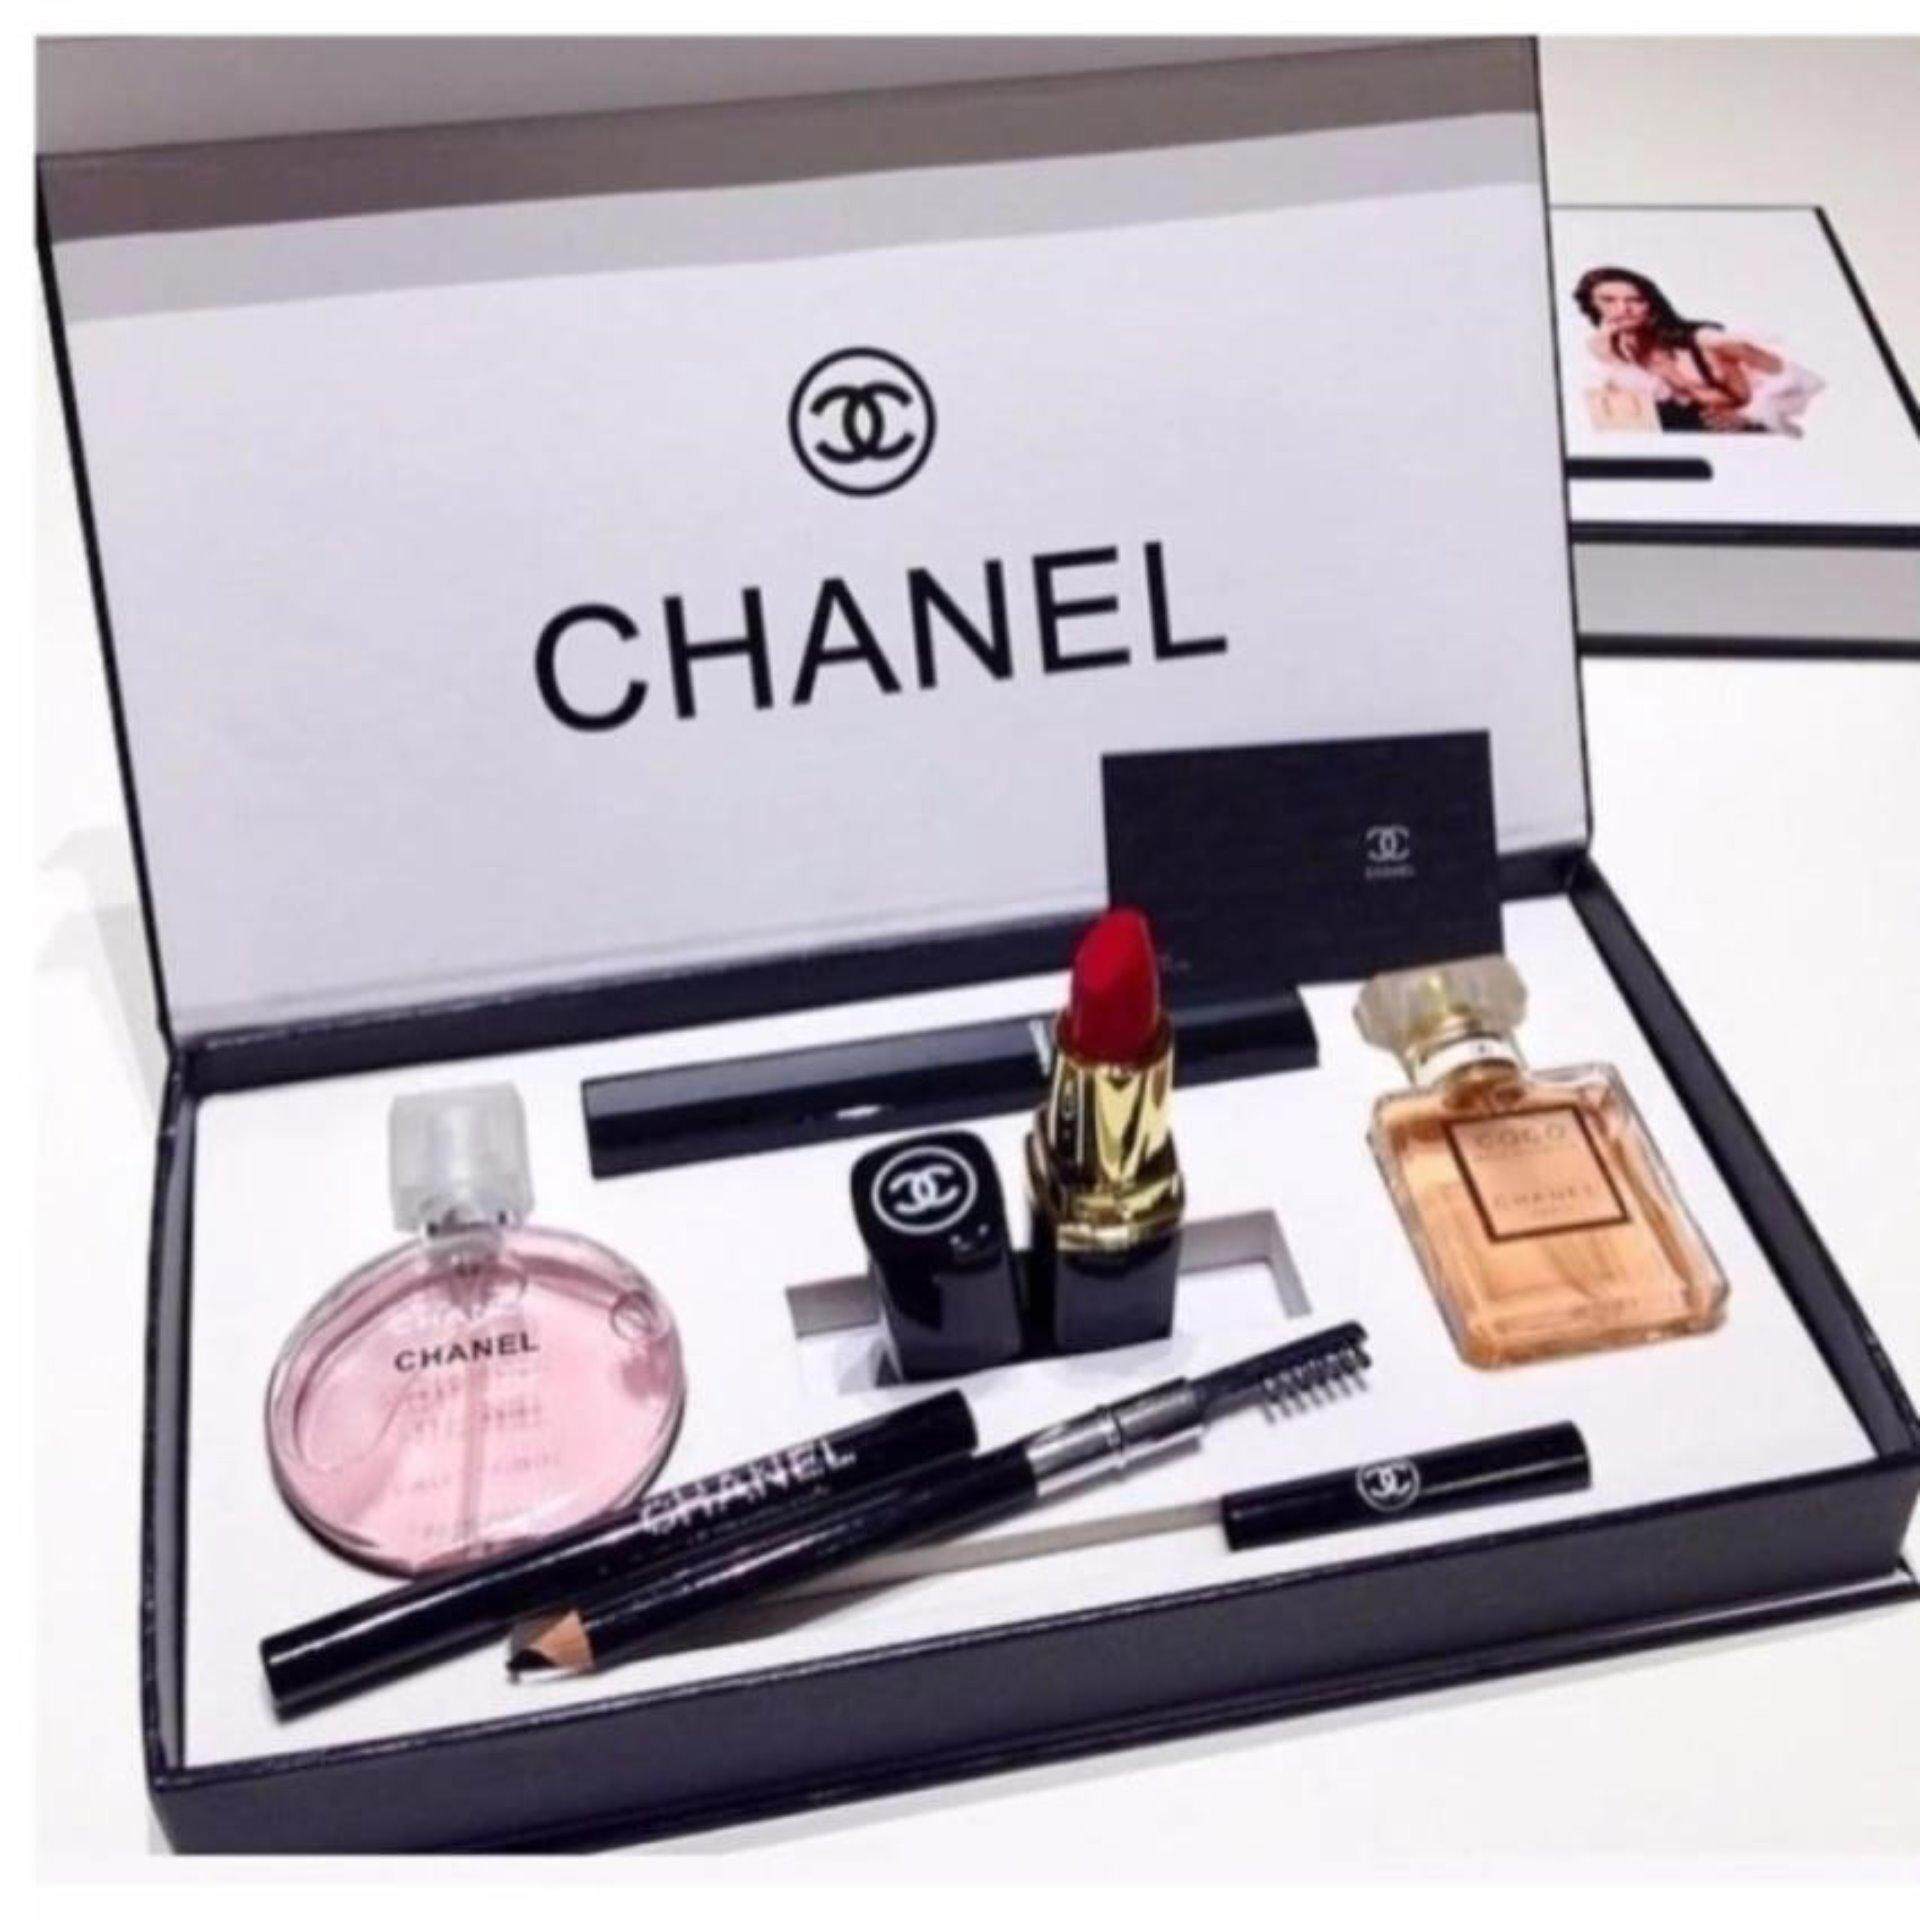 Chanel 5 in 1 Limited Edition Gift set Chance Chanel 15ml